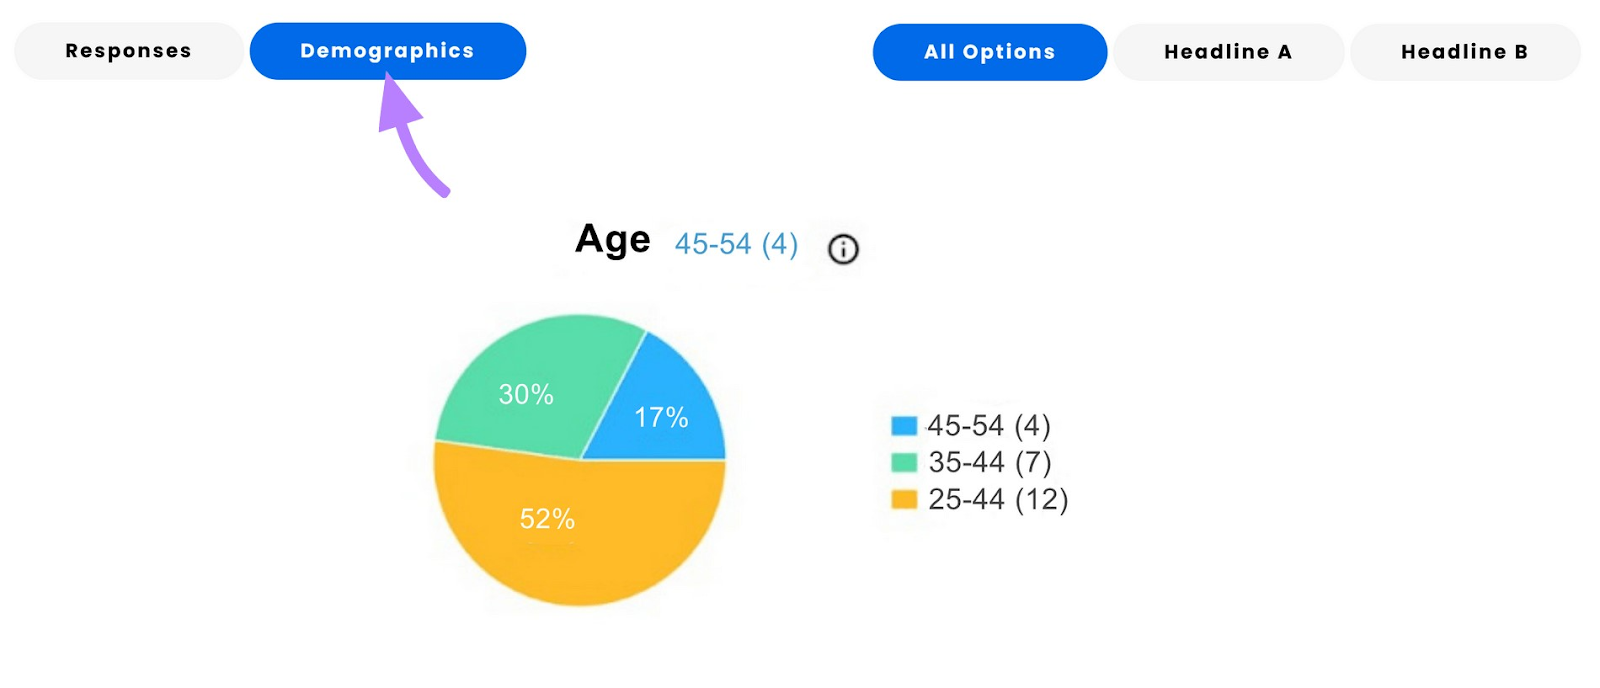 “Demographics” tab shows age, gender, and sentiment breakdowns for testers